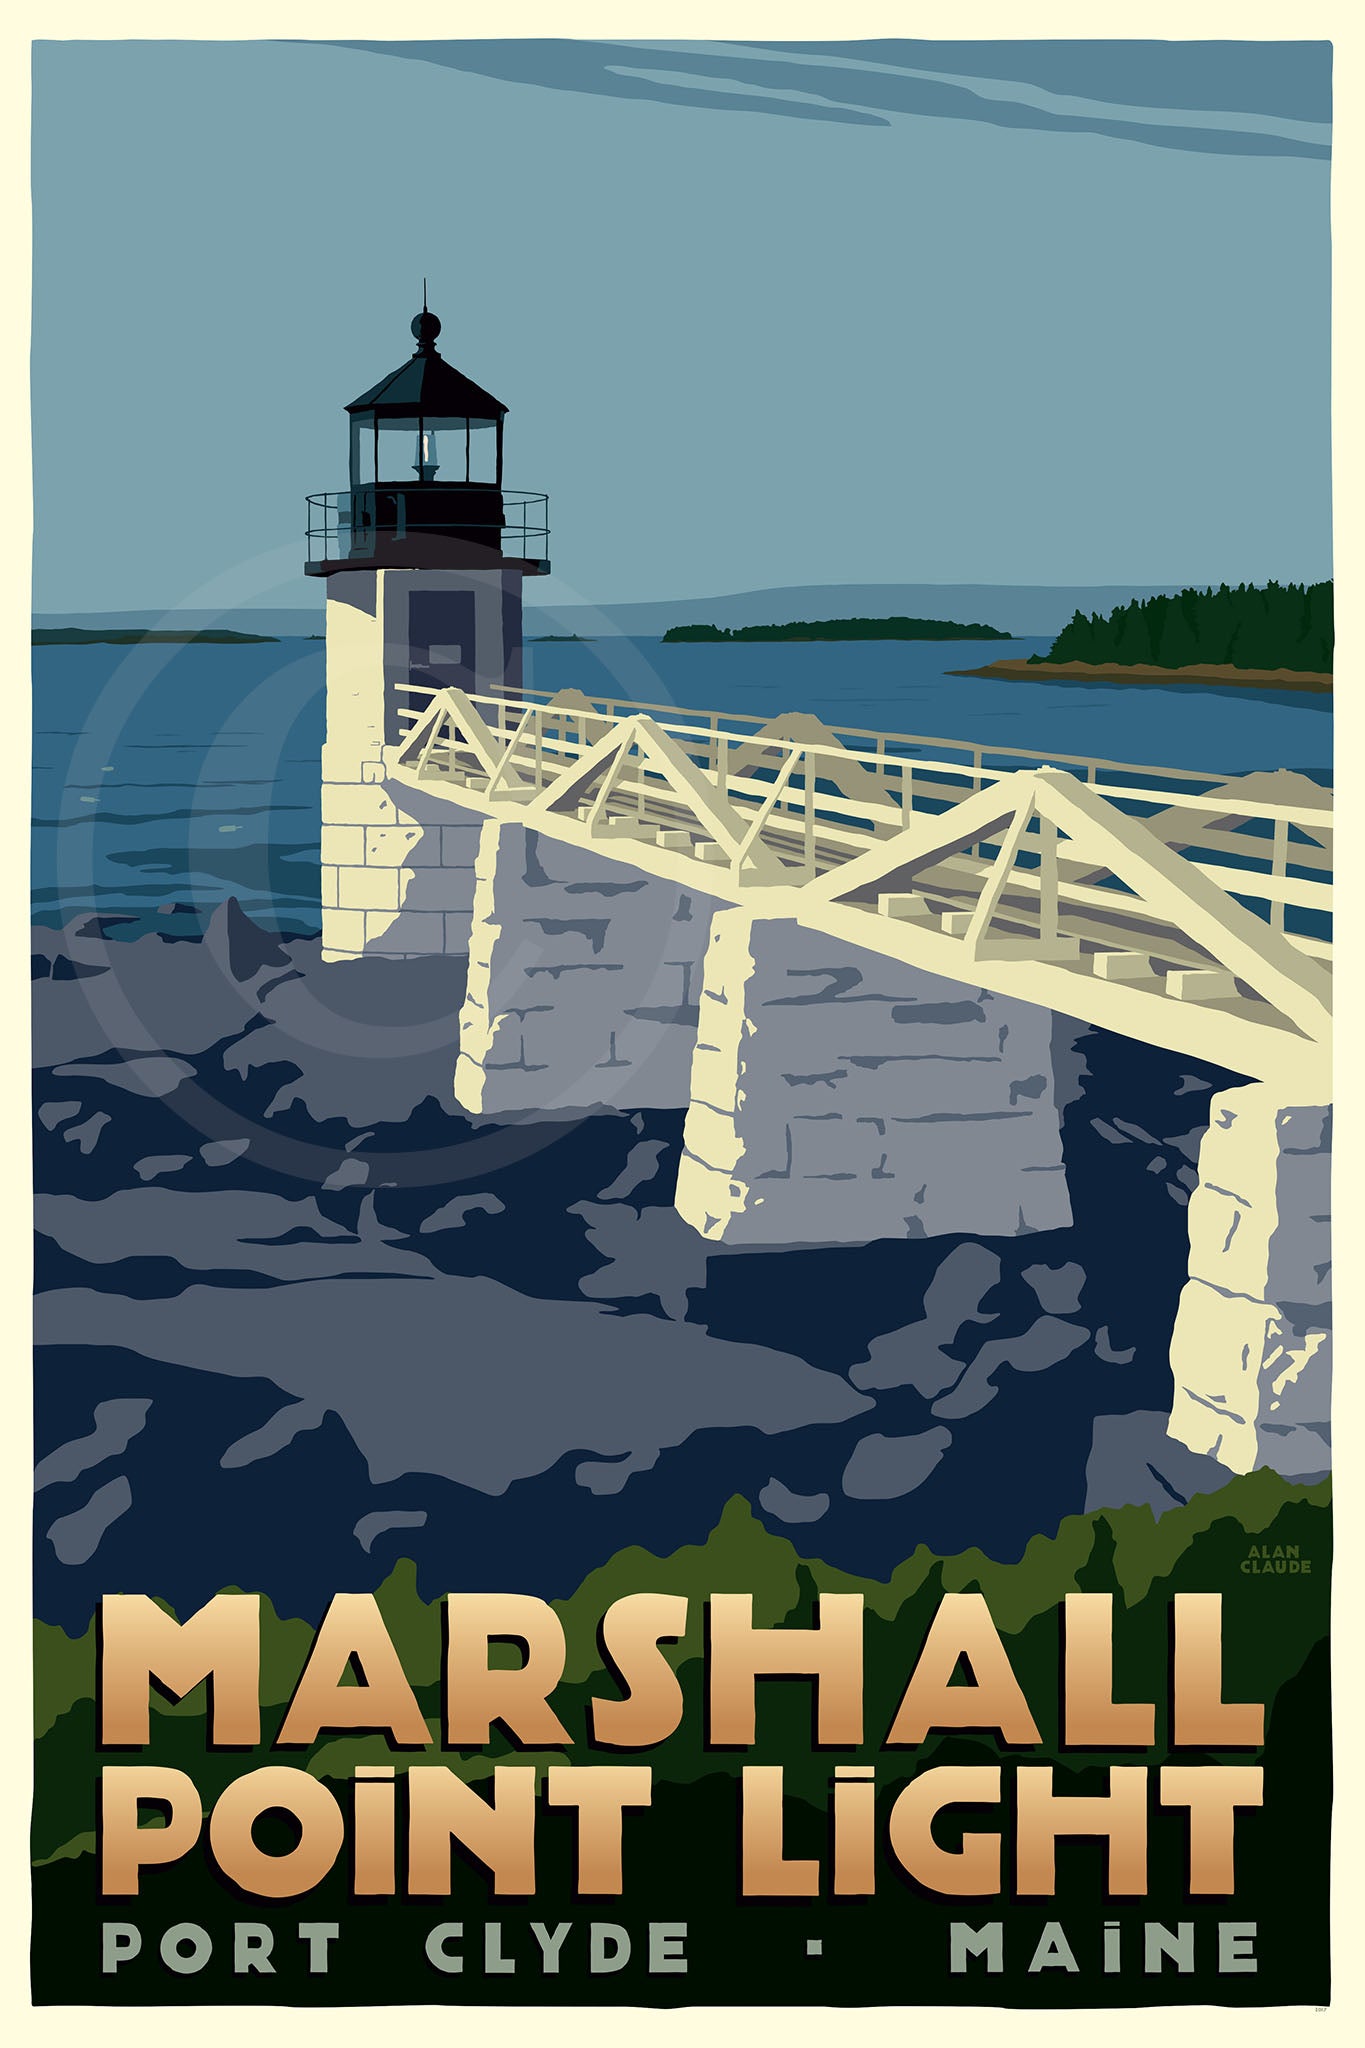 Marshall Point Light Art Print 36" x 53" Travel Poster By Alan Claude - Maine